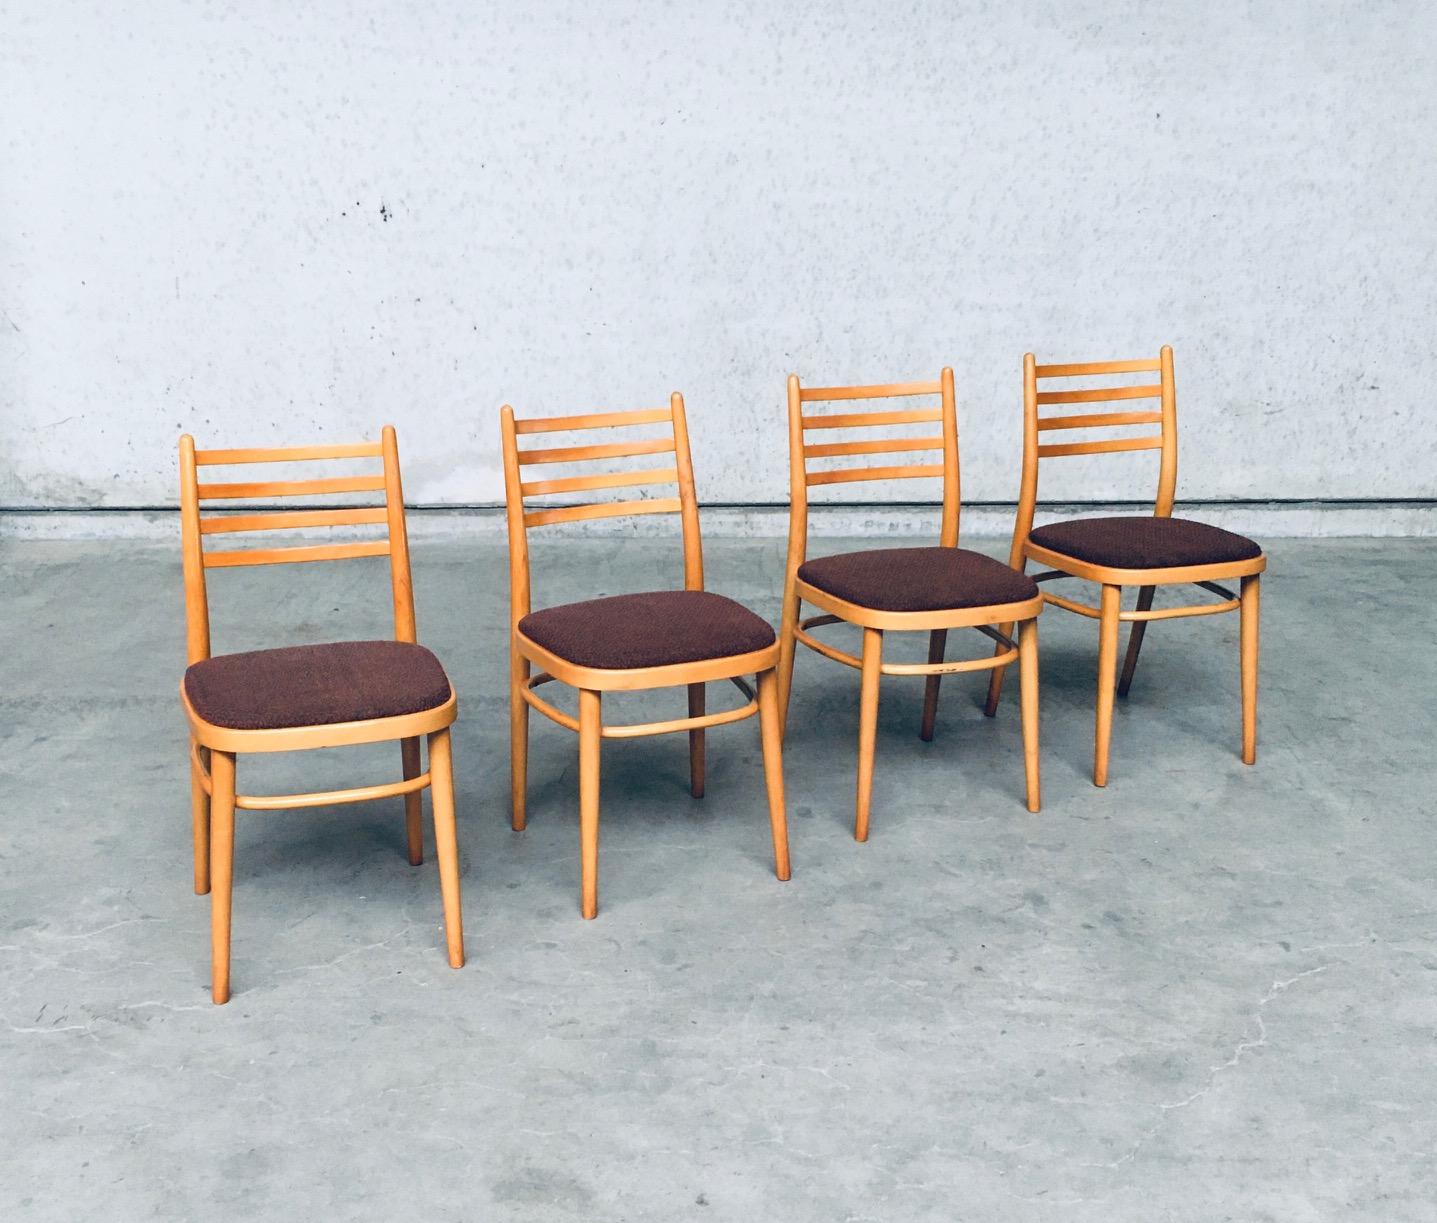 Vintage Mid-Century Modern design dining chair set by TON, 1968 Czechoslovakia. In the style of Thonet. Some have original TON factory label, with the manufacturing date. Bend beech wood constrution with brown fabric seat. With a label of the